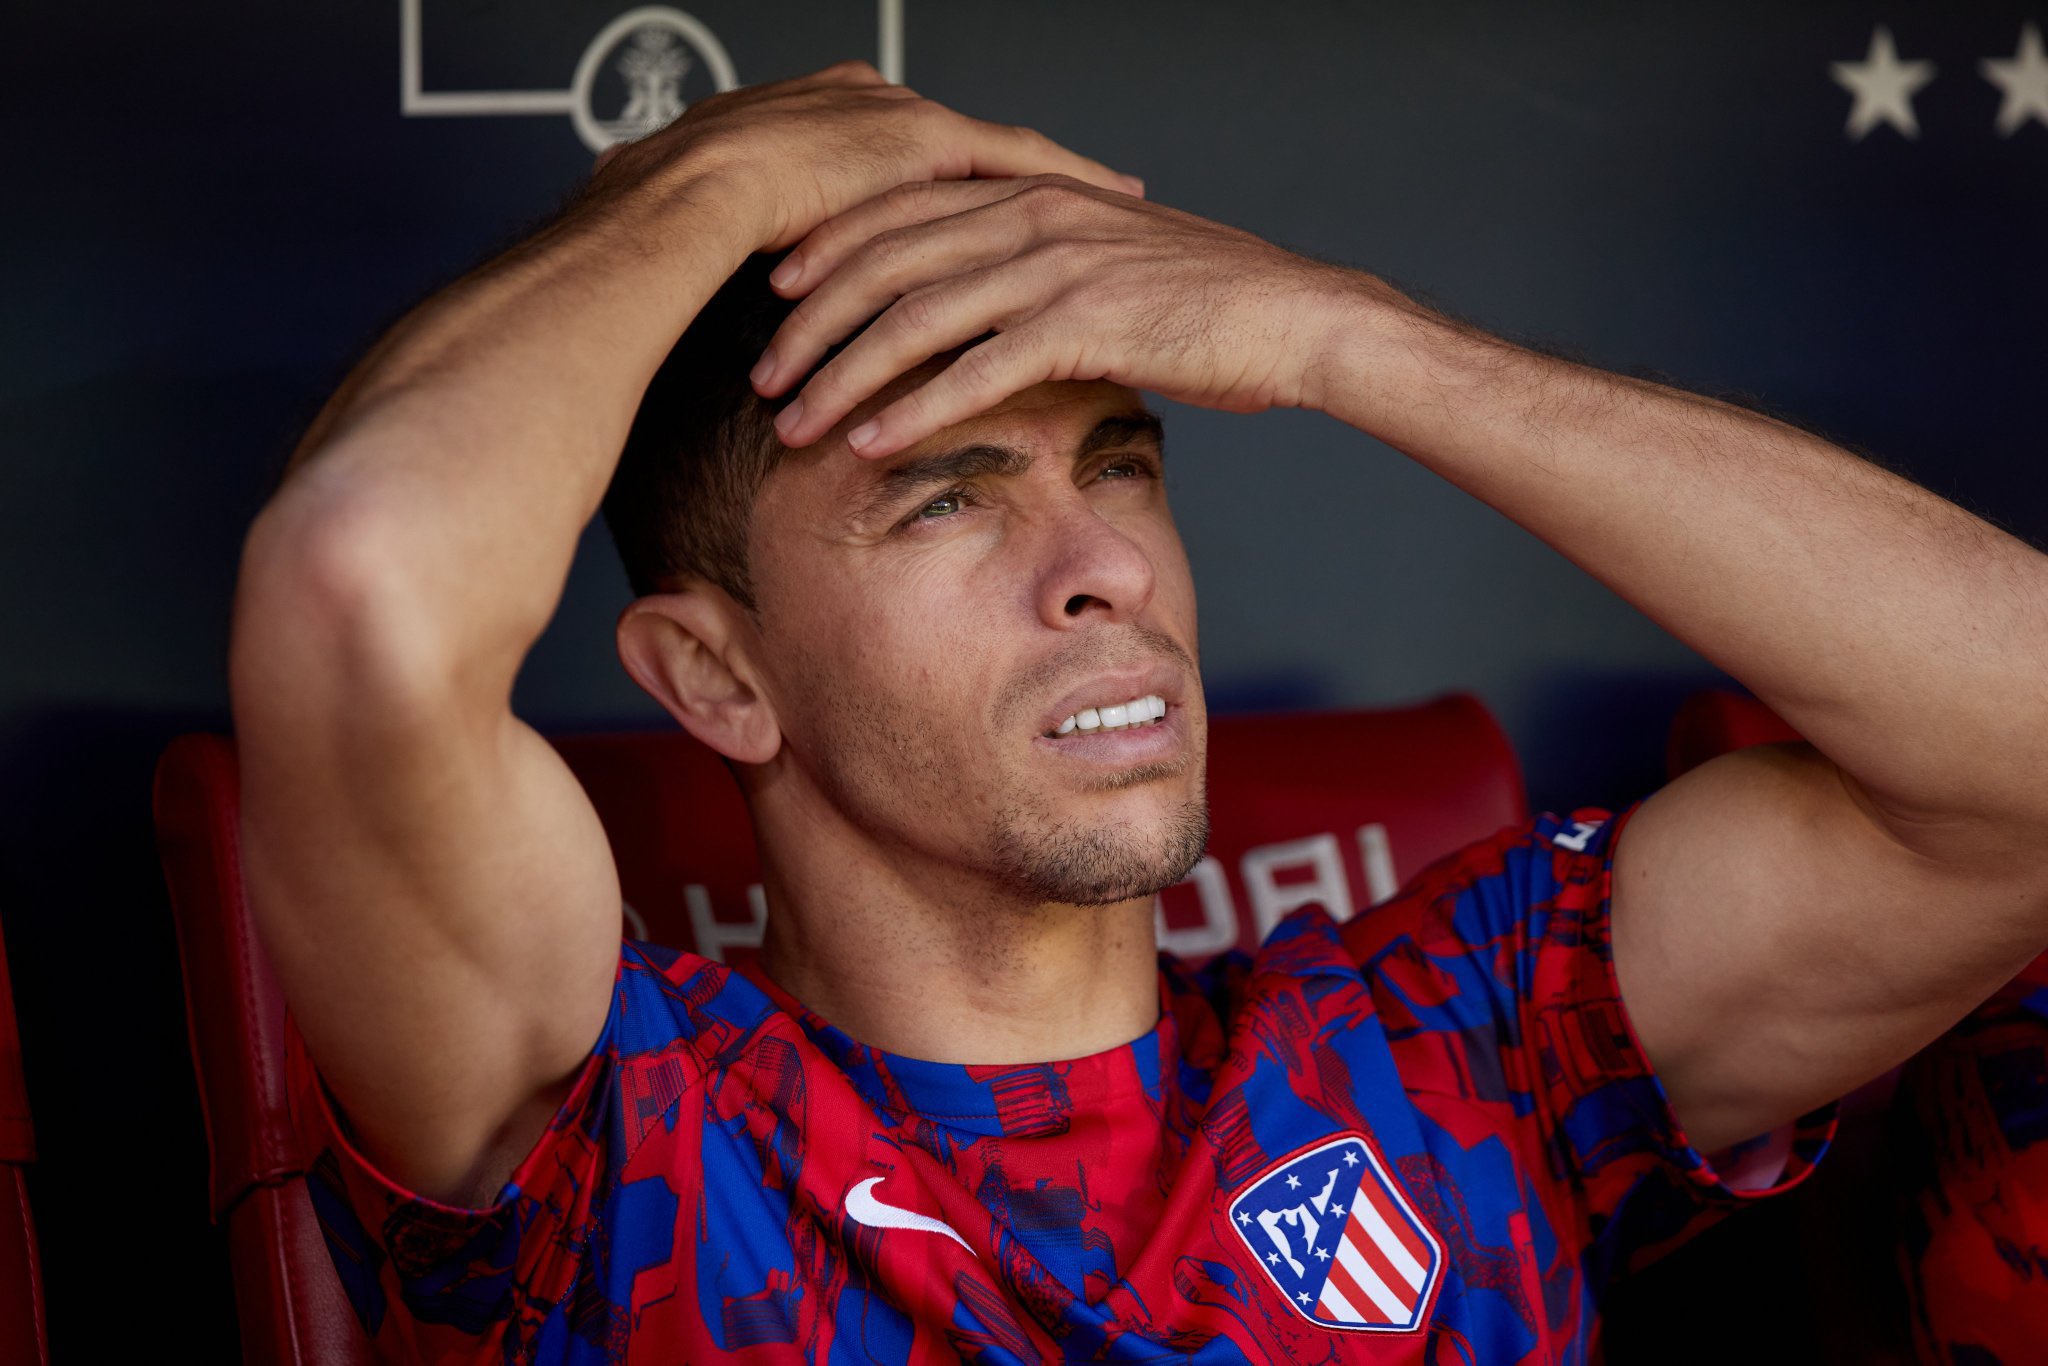 Atletico Madrid summer exodus continues with another defender set to depart as free agent